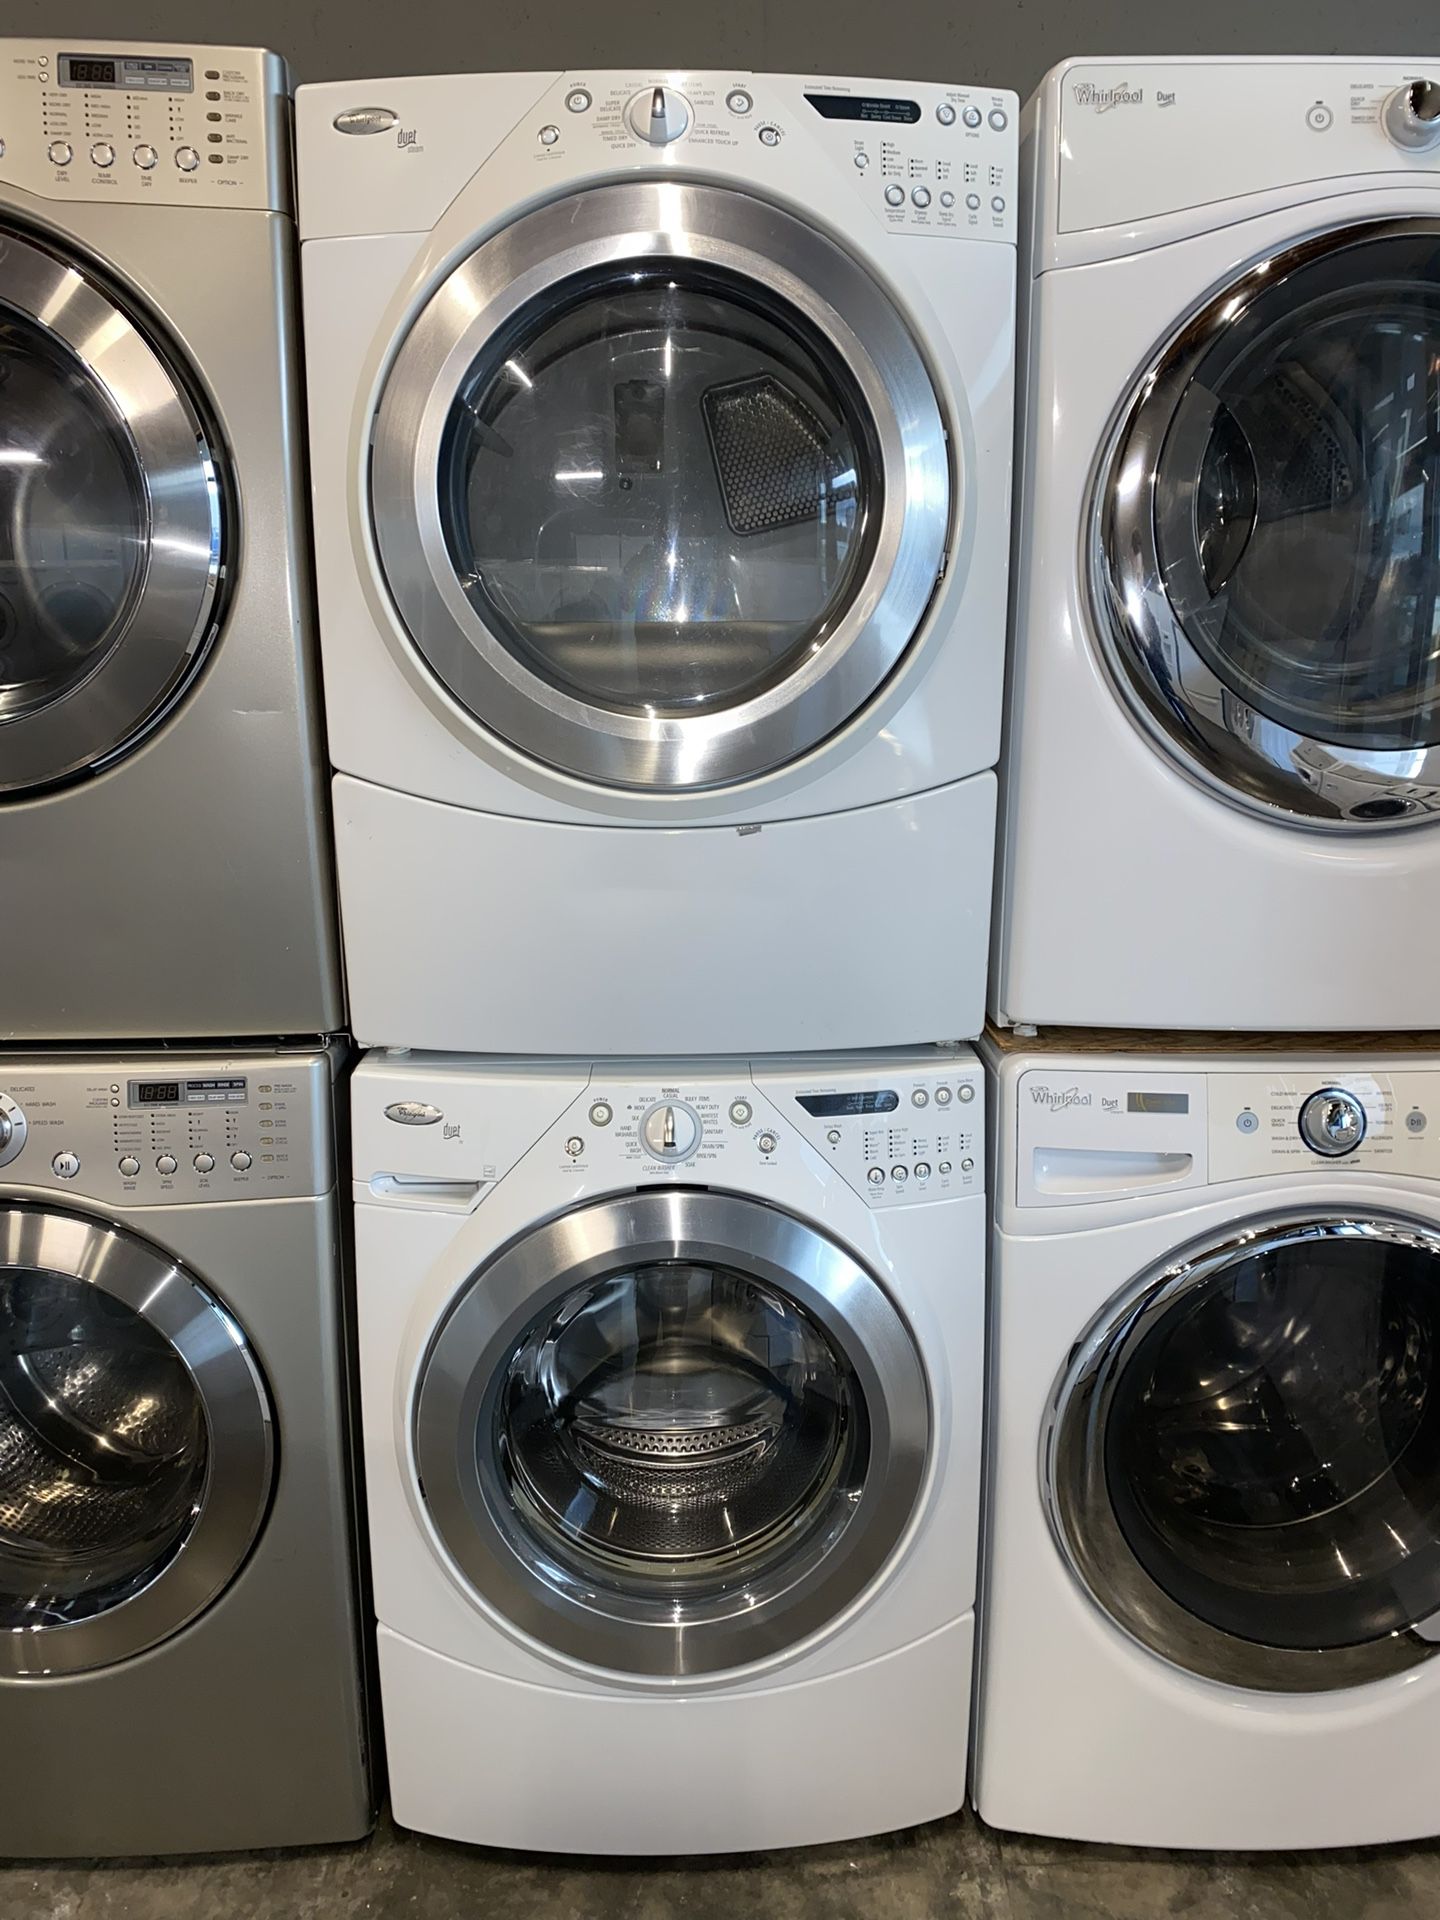 WHIRLPOOL XL CAPACITY WASHER DRYER ELECTRIC SET 